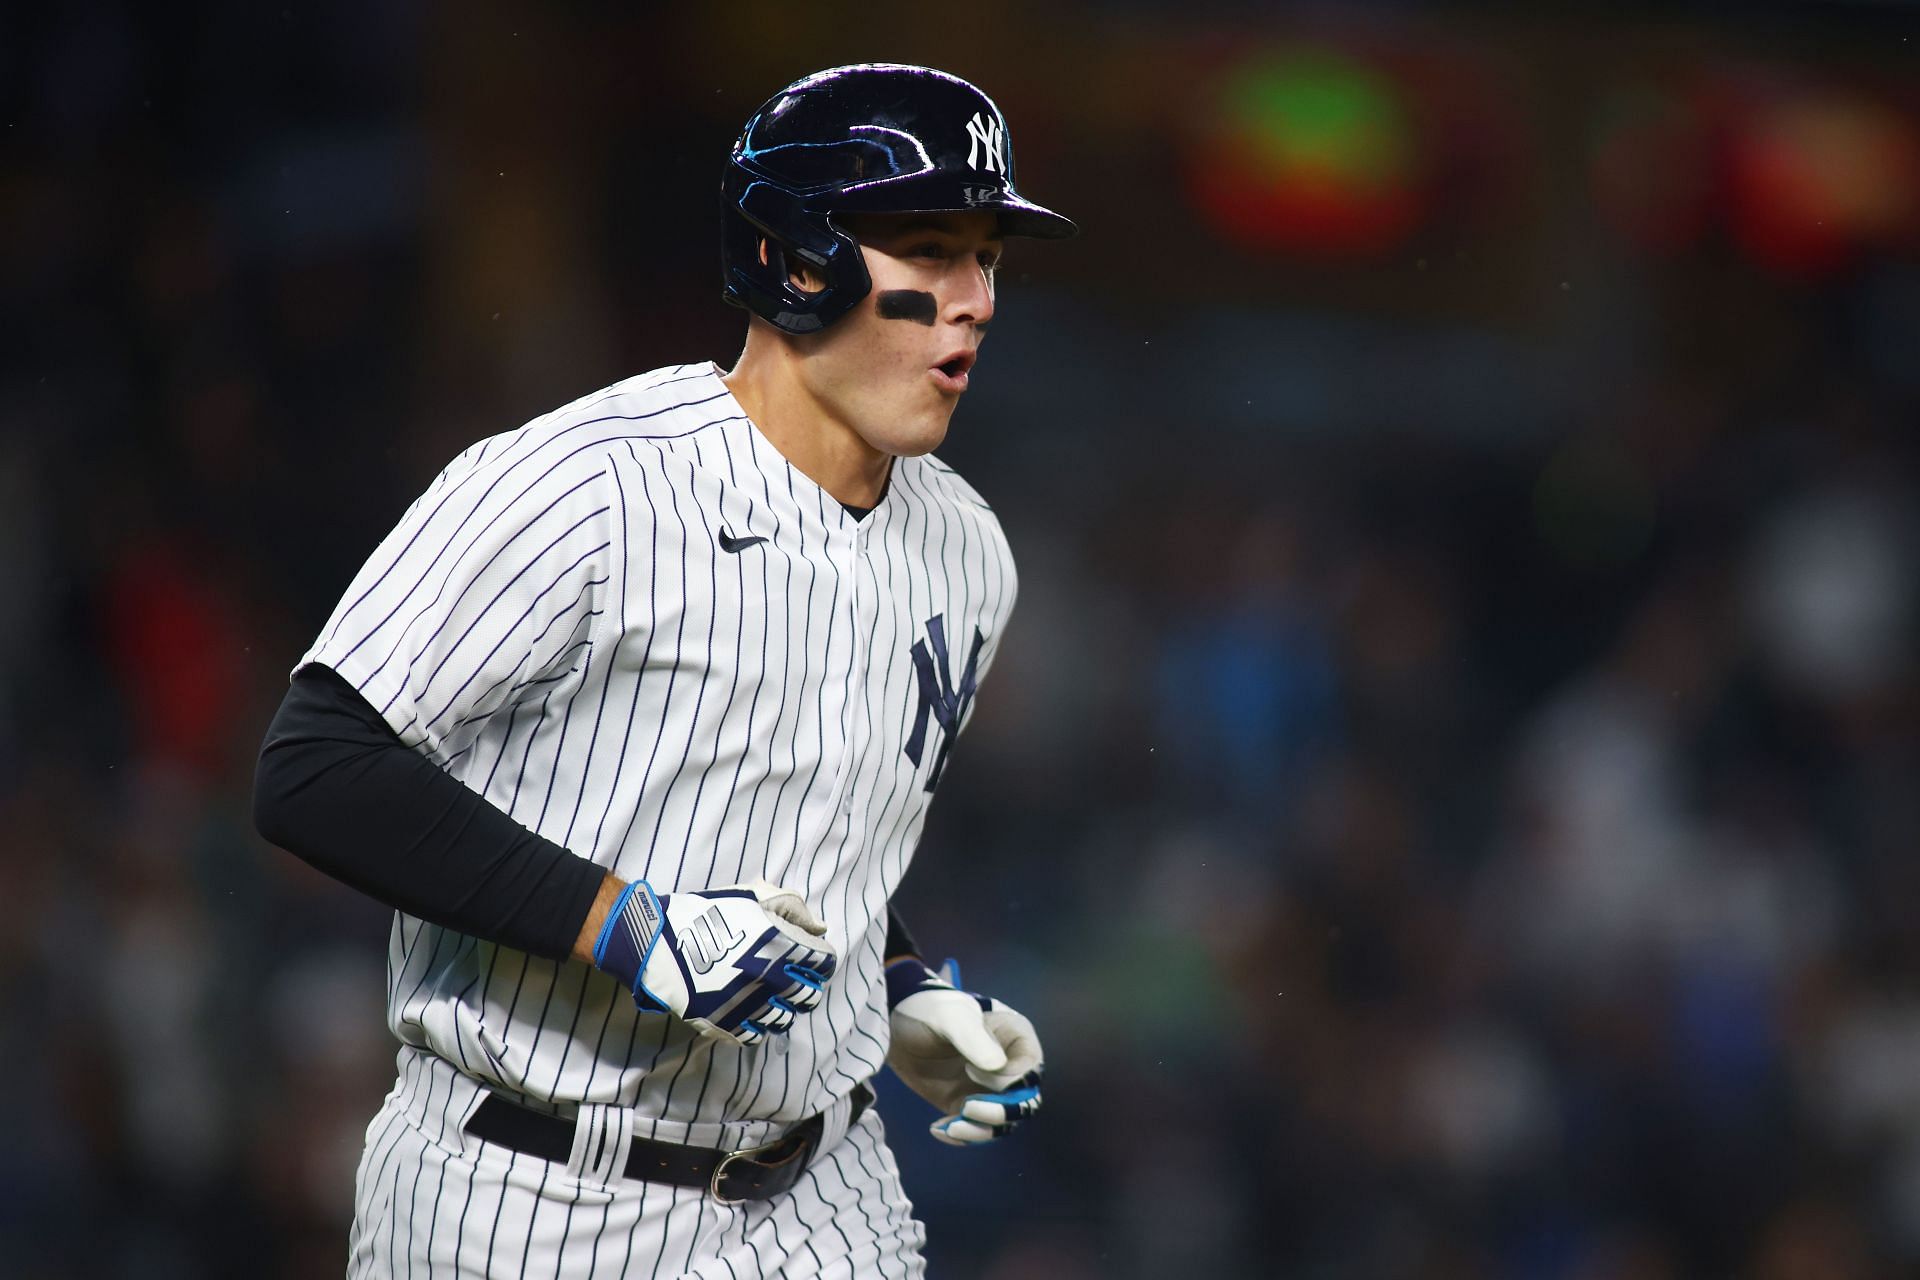 New York Yankees Anthony Rizzo blasted a career-high three homers against the Baltimore Orioles at Yankee Stadium last night.